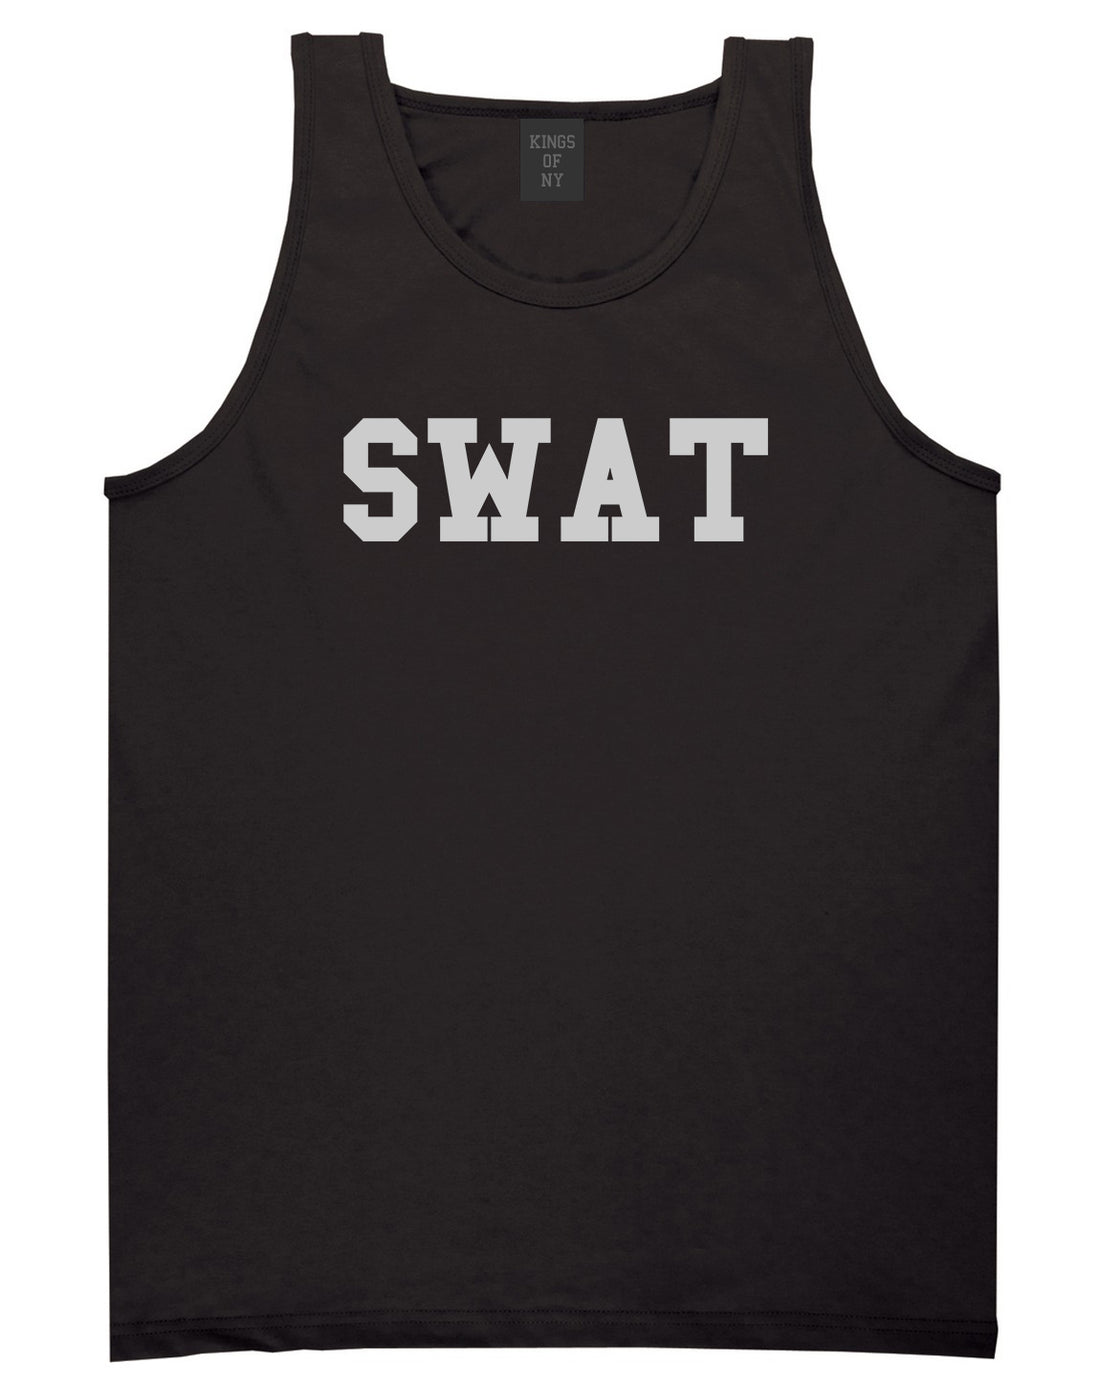 Swat Law Enforcement Mens Black Tank Top Shirt by KINGS OF NY